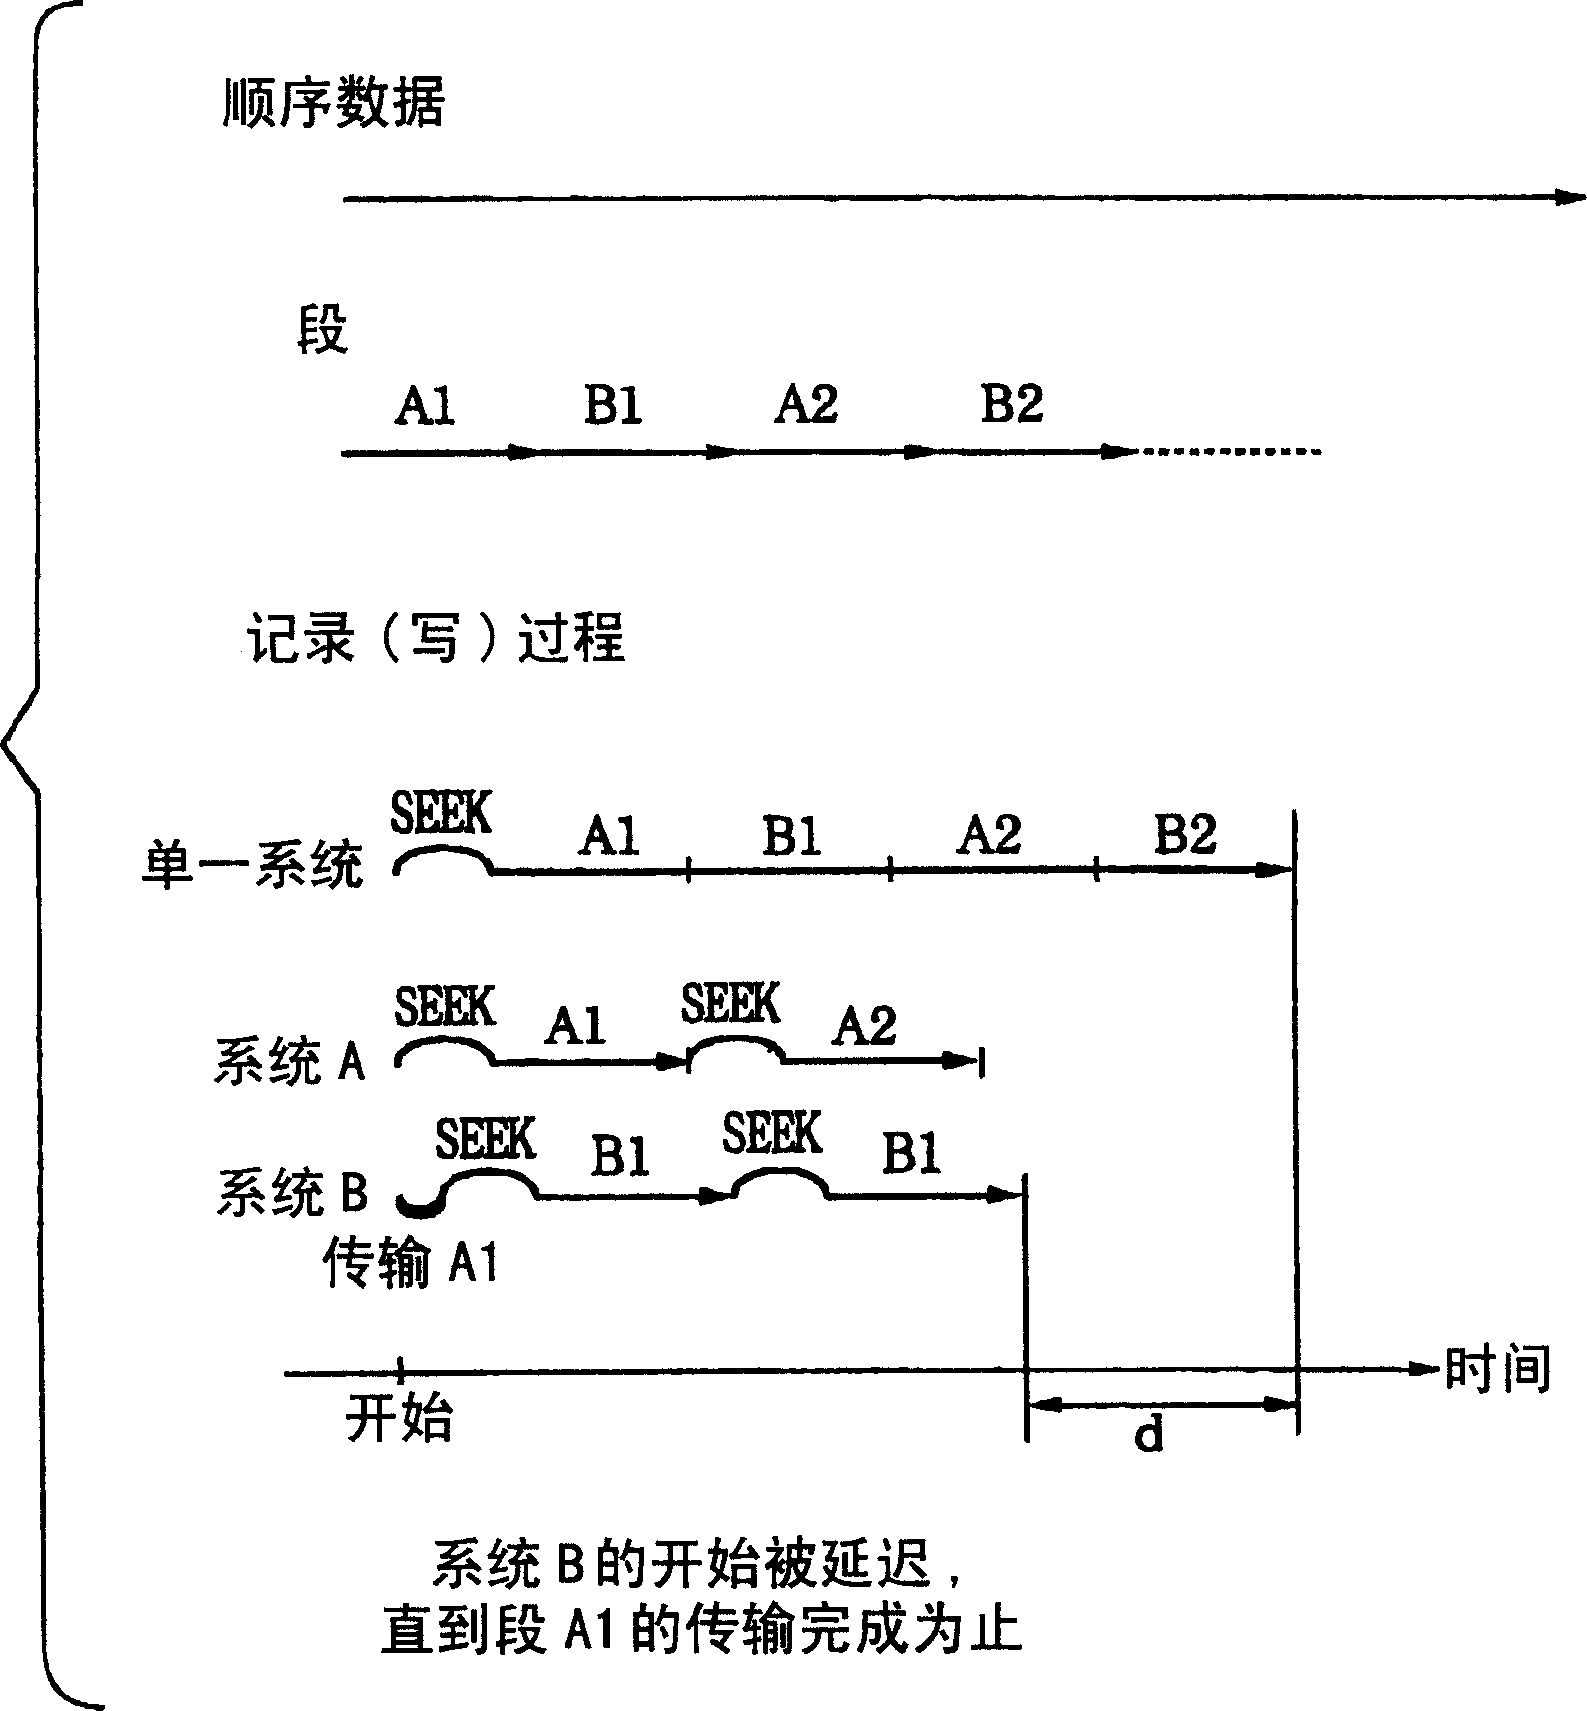 Optical disc apparatus with multiple reproduction/record units for parallel operation